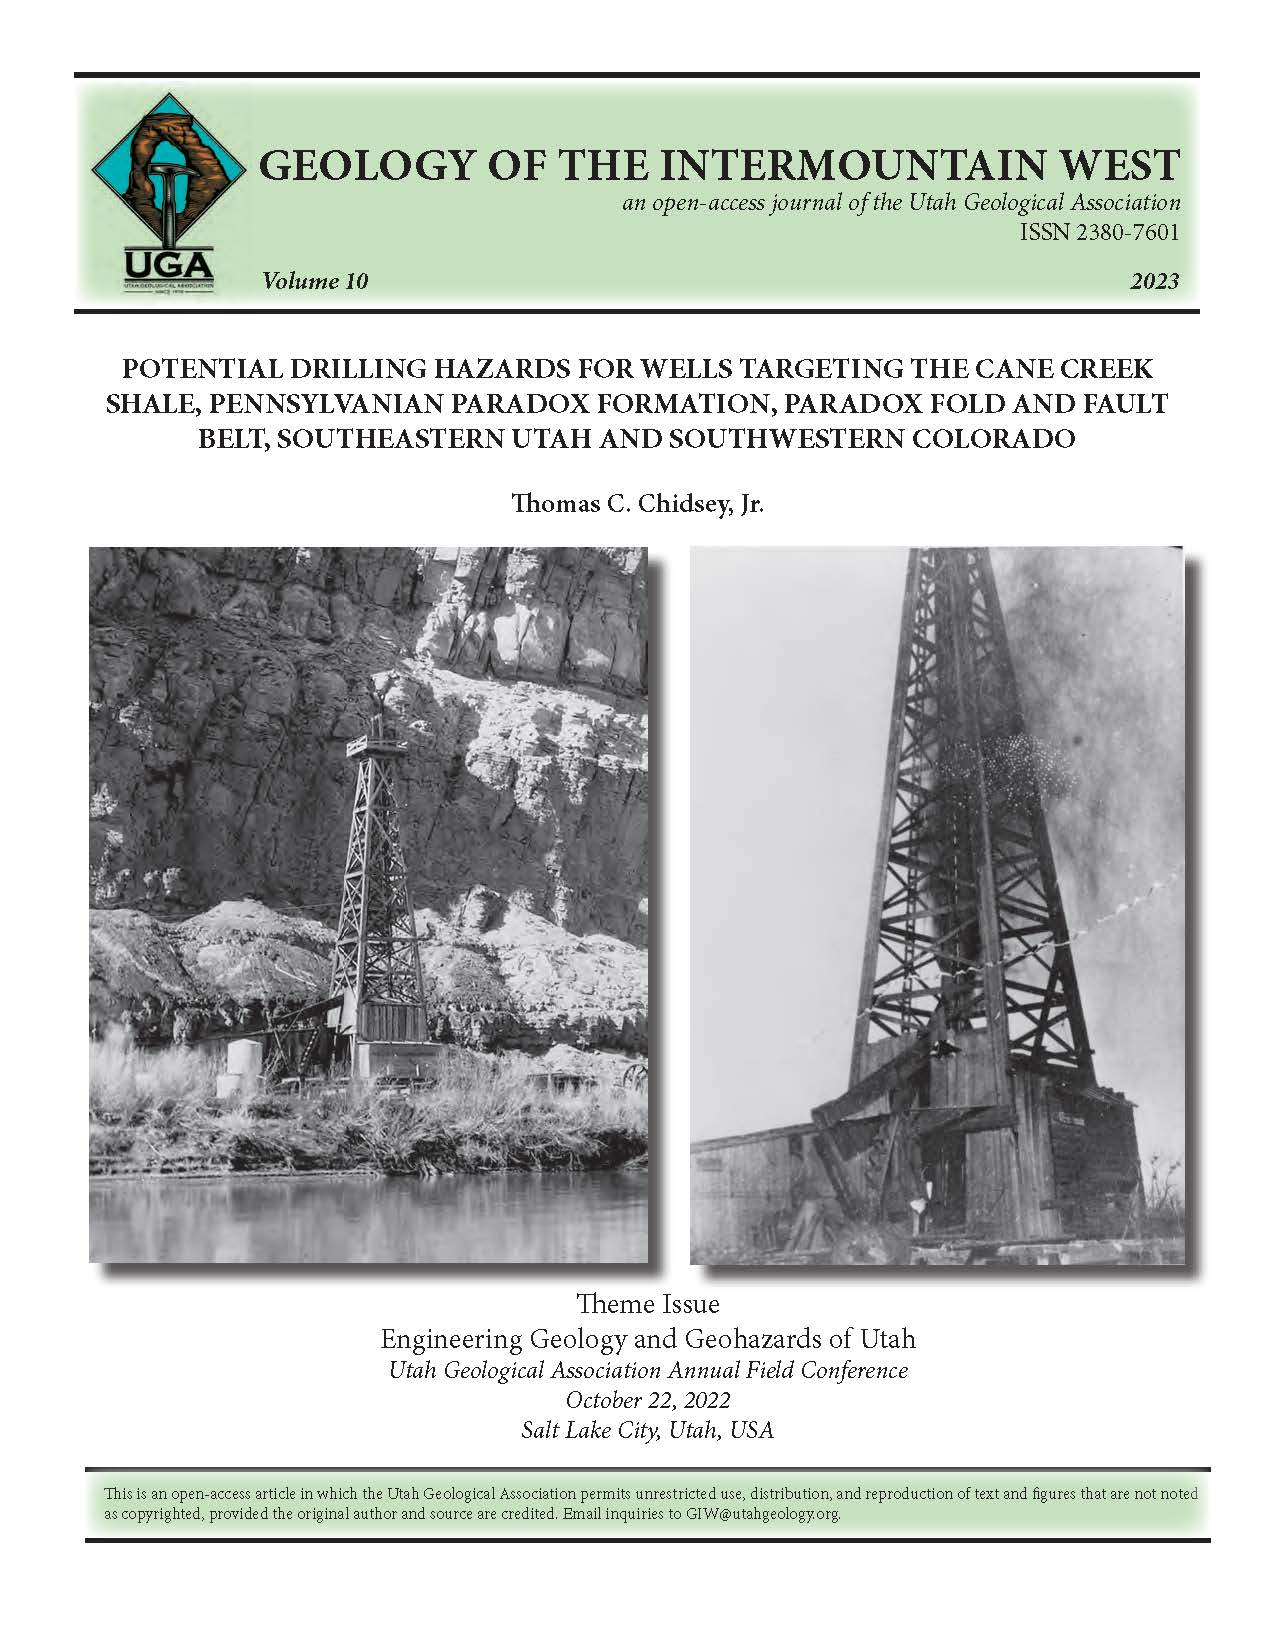 Midwest Exploration and Utah Southern No. 1 Shafer well, drilled in 1924. Left photograph is the view if the rig across the Colorado River. The cable-tool rig was floated down the river from the town of Moab. Right photograph of the well blowing out after encountering gas at 2028 feet (618 m) in the Cane Creek shale. The rig caught on fire and was destroyed. Courtesy of the Utah Division of State History and the Utah State Historical Society.